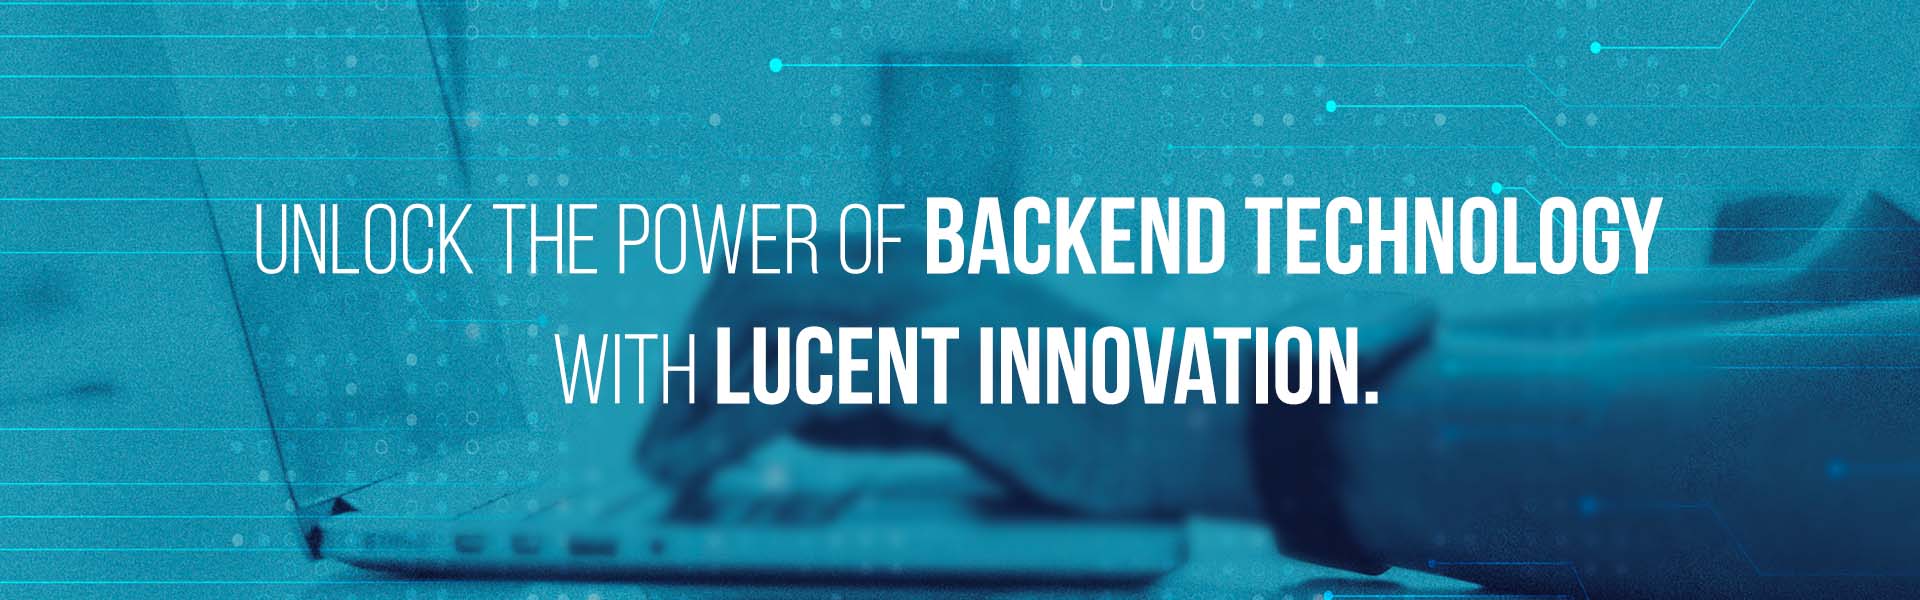 Unlock the power of Backend Technology with Lucent Innovation.